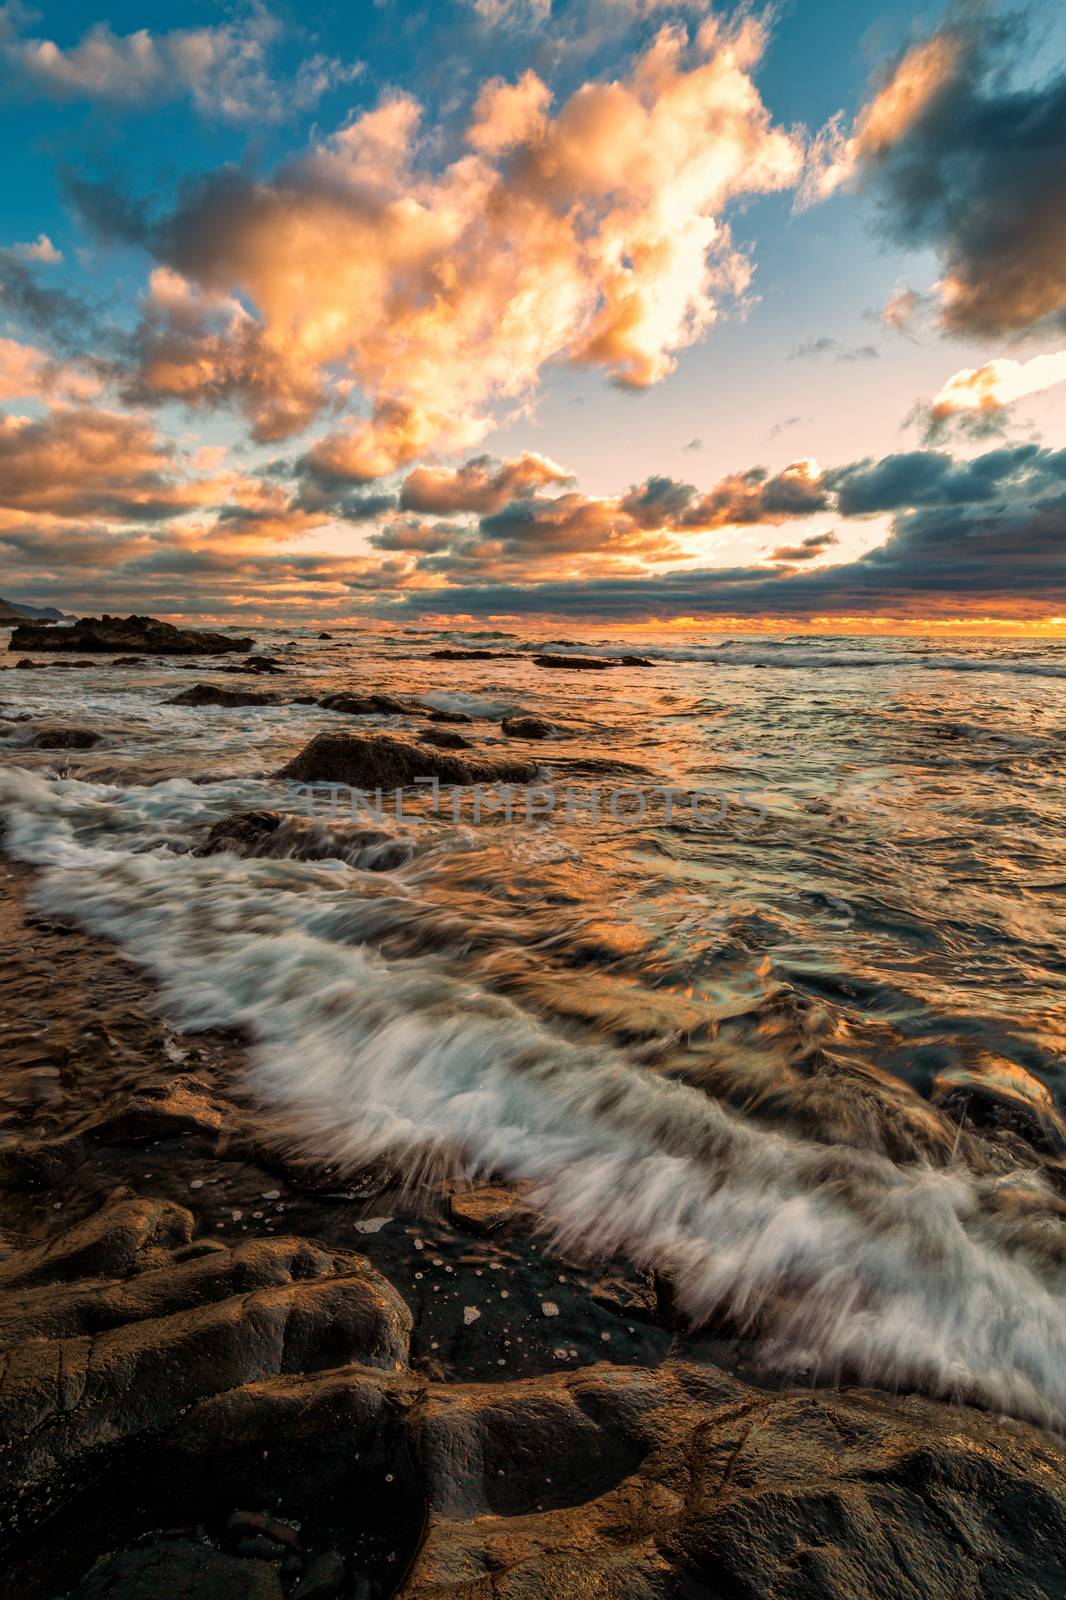 A Dramatic Sunset at the Beach, Color Image by backyard_photography